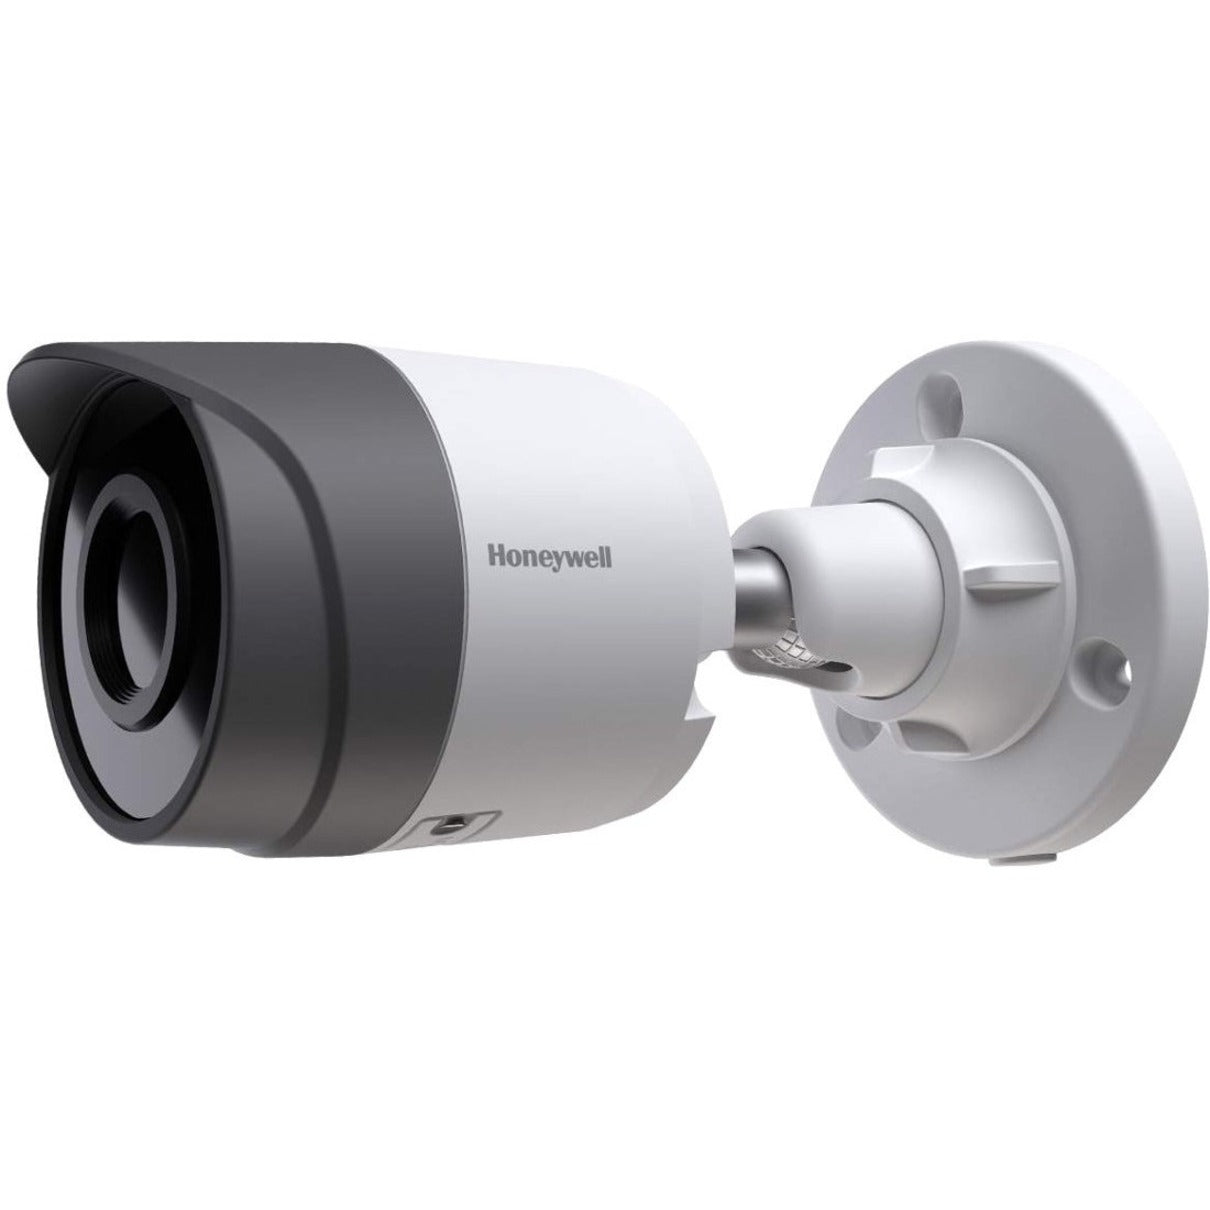 Honeywell HC30WB5R1 5MP WDR IR IP Bullet Camera, Color/Monochrome, 2560 x 1920 Resolution, 164.04 ft Night Vision Distance